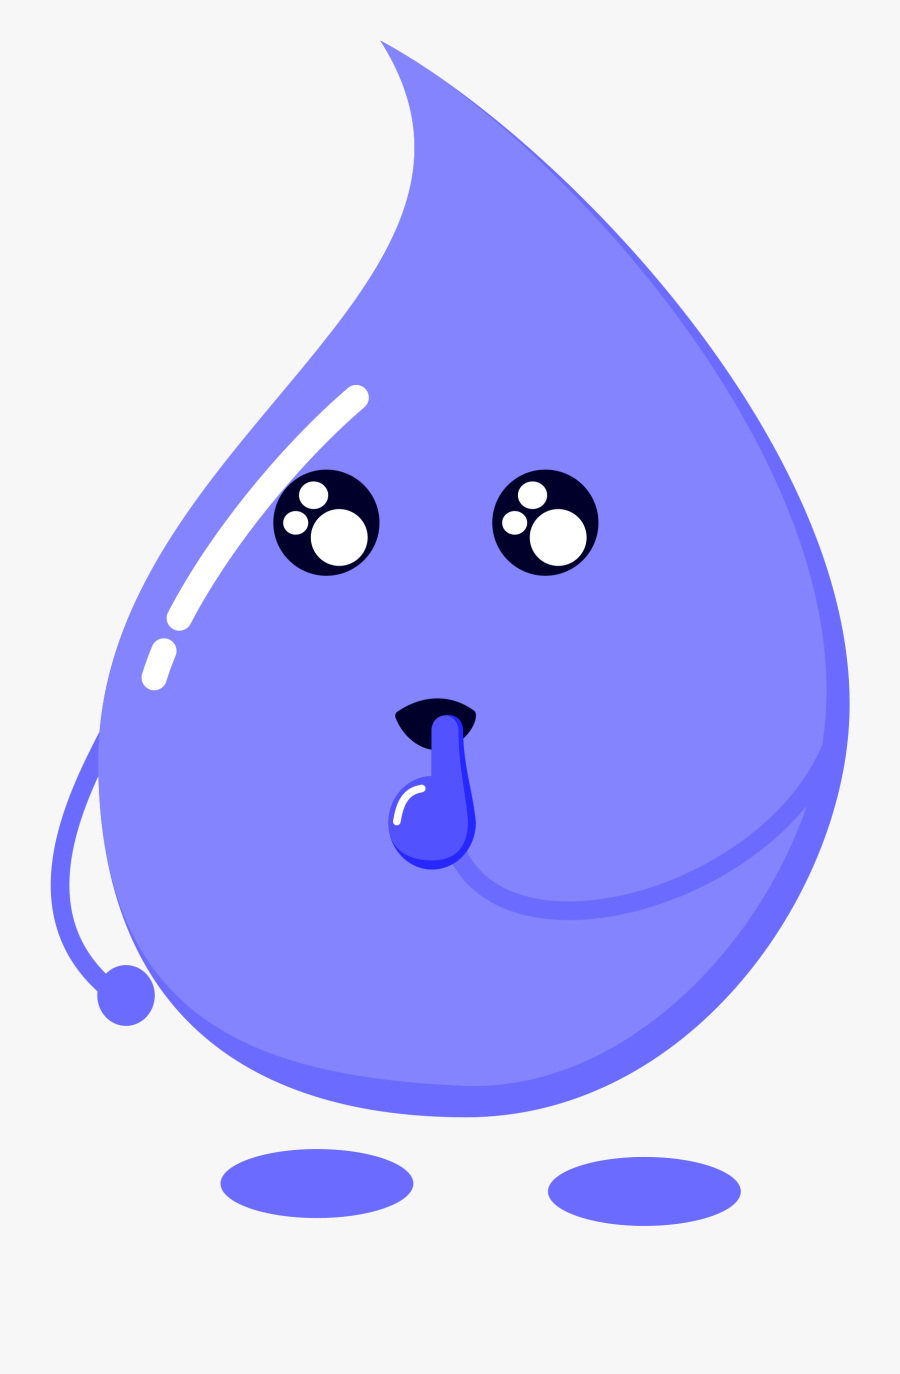 Water Drop Drops Clipart Droplet Wonder Big Image Transparent - Water With Face Clipart, Transparent Clipart